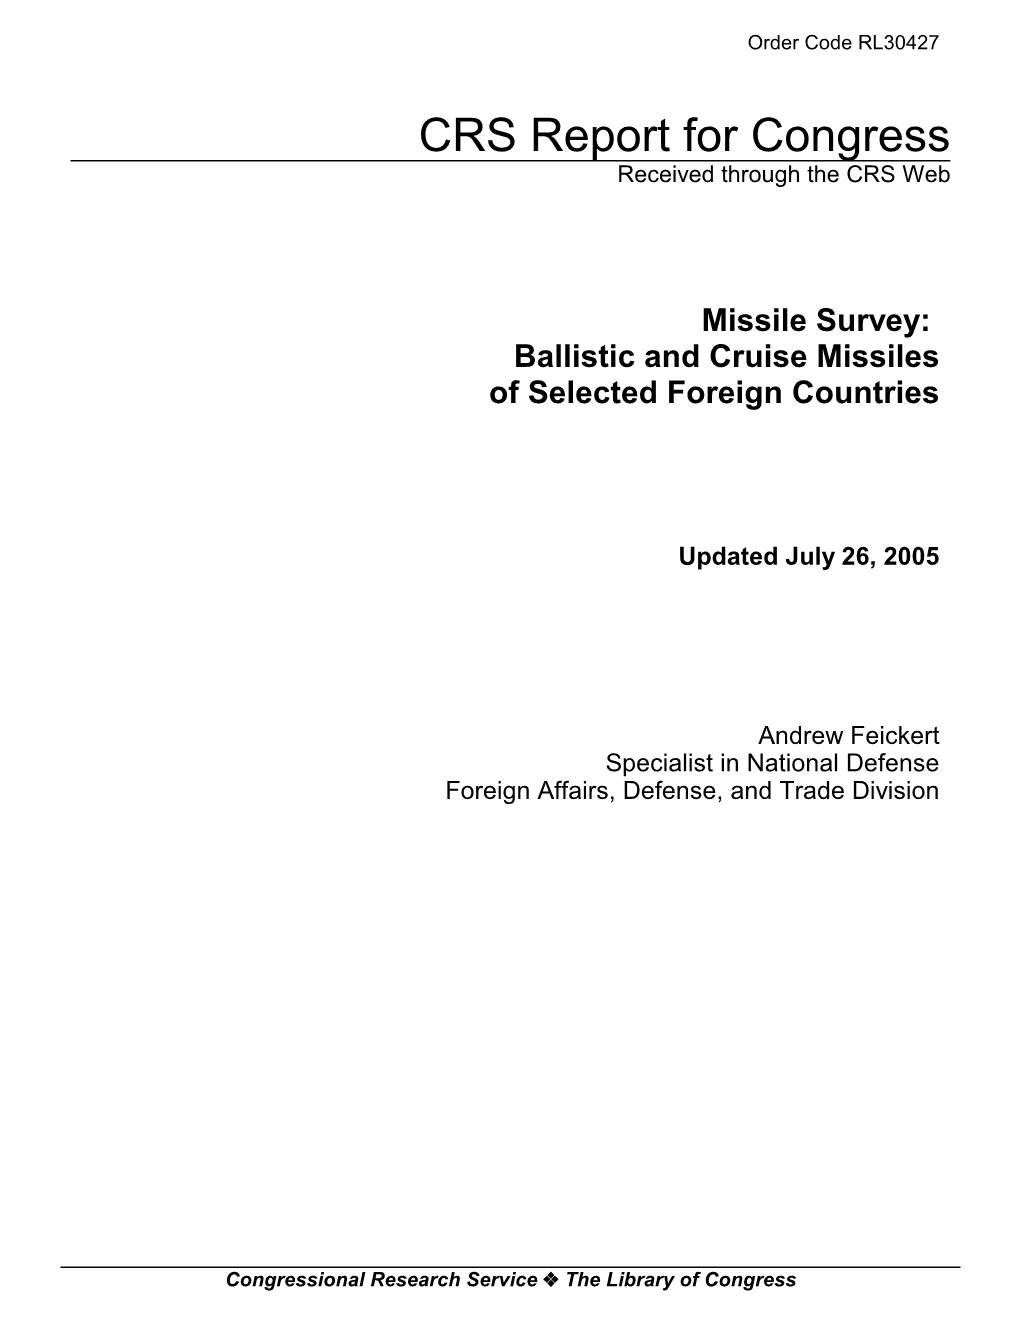 Ballistic and Cruise Missiles of Selected Foreign Countries